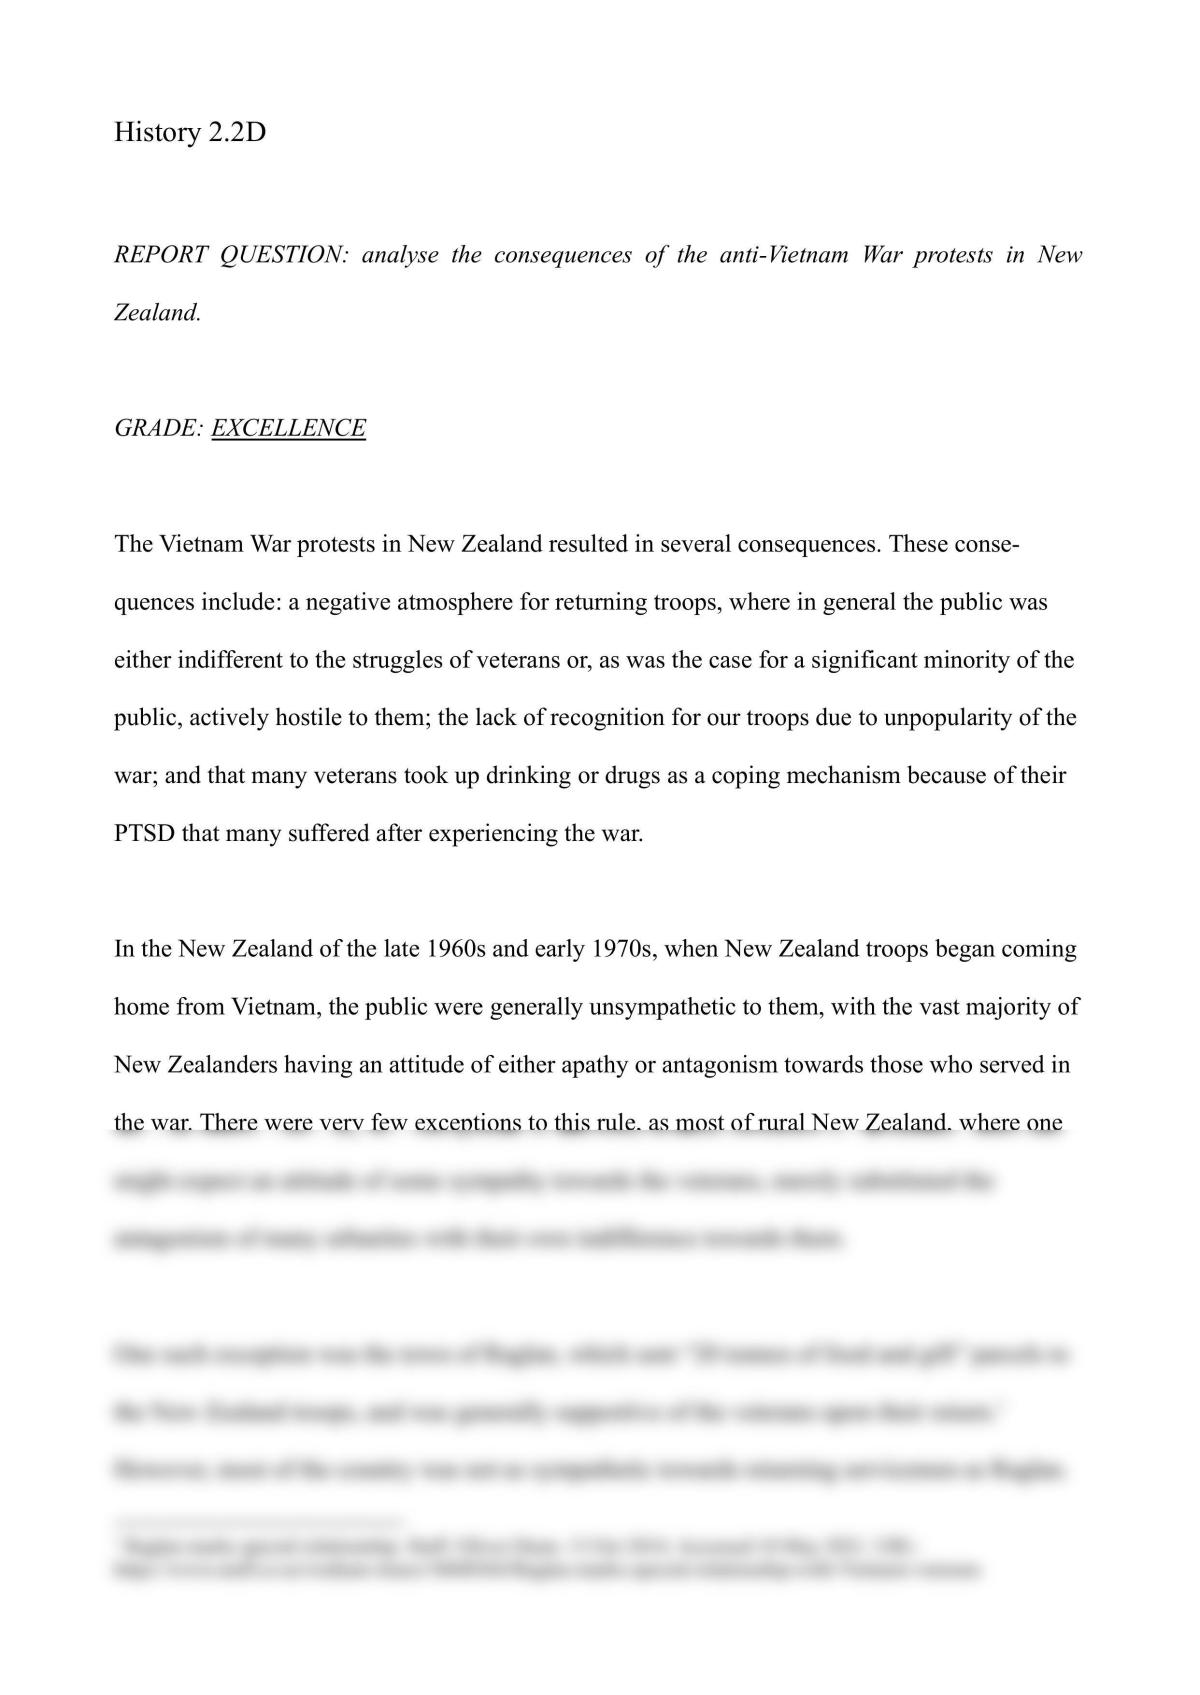 Report discussing the consequences of the Vietnam War protests - Page 1